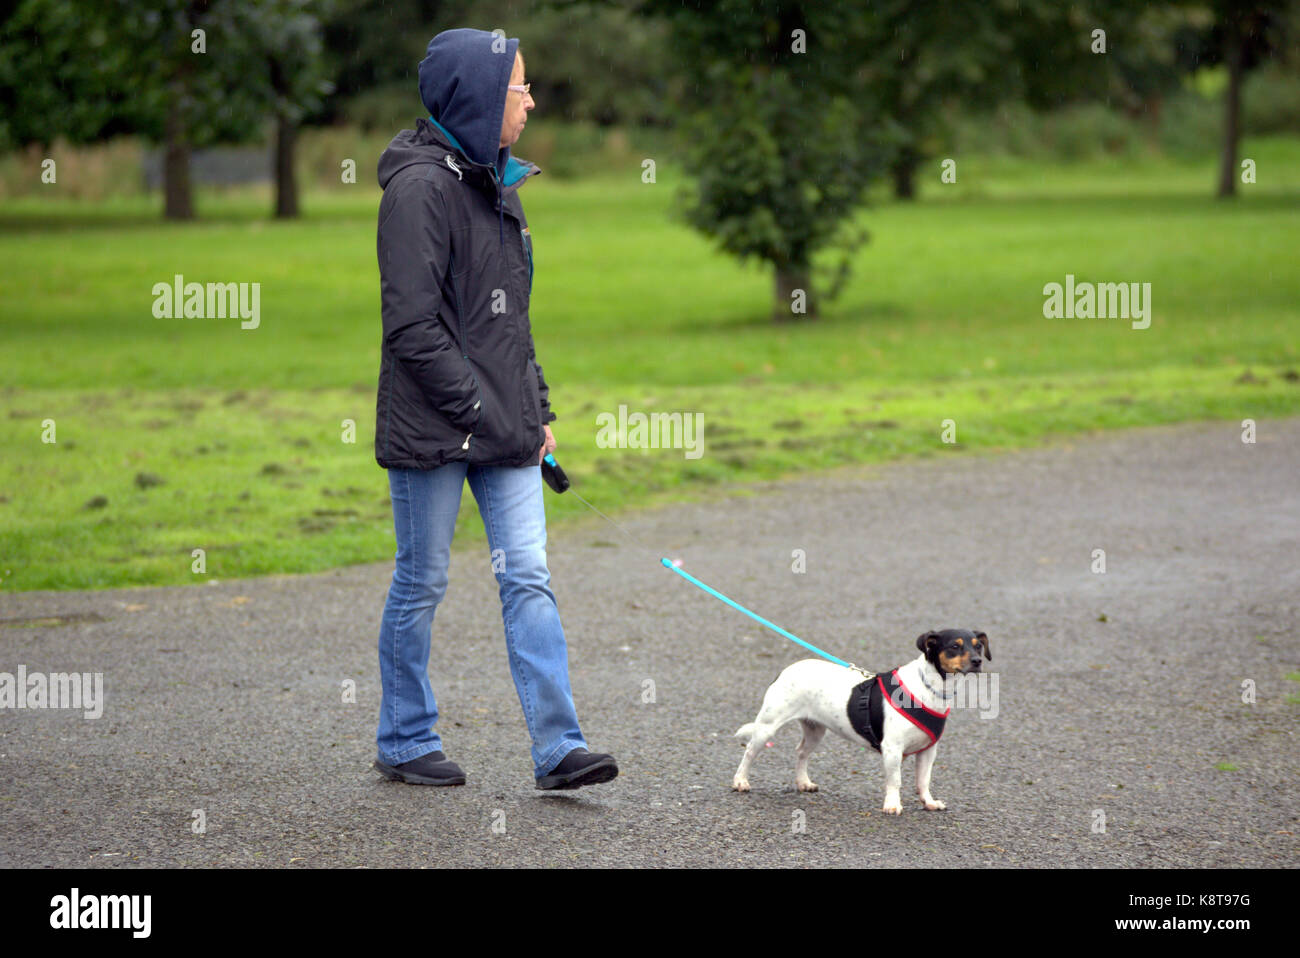 Knightswood Park Jack Russell dog taking owner for a walk  dog pulling on his leash Stock Photo